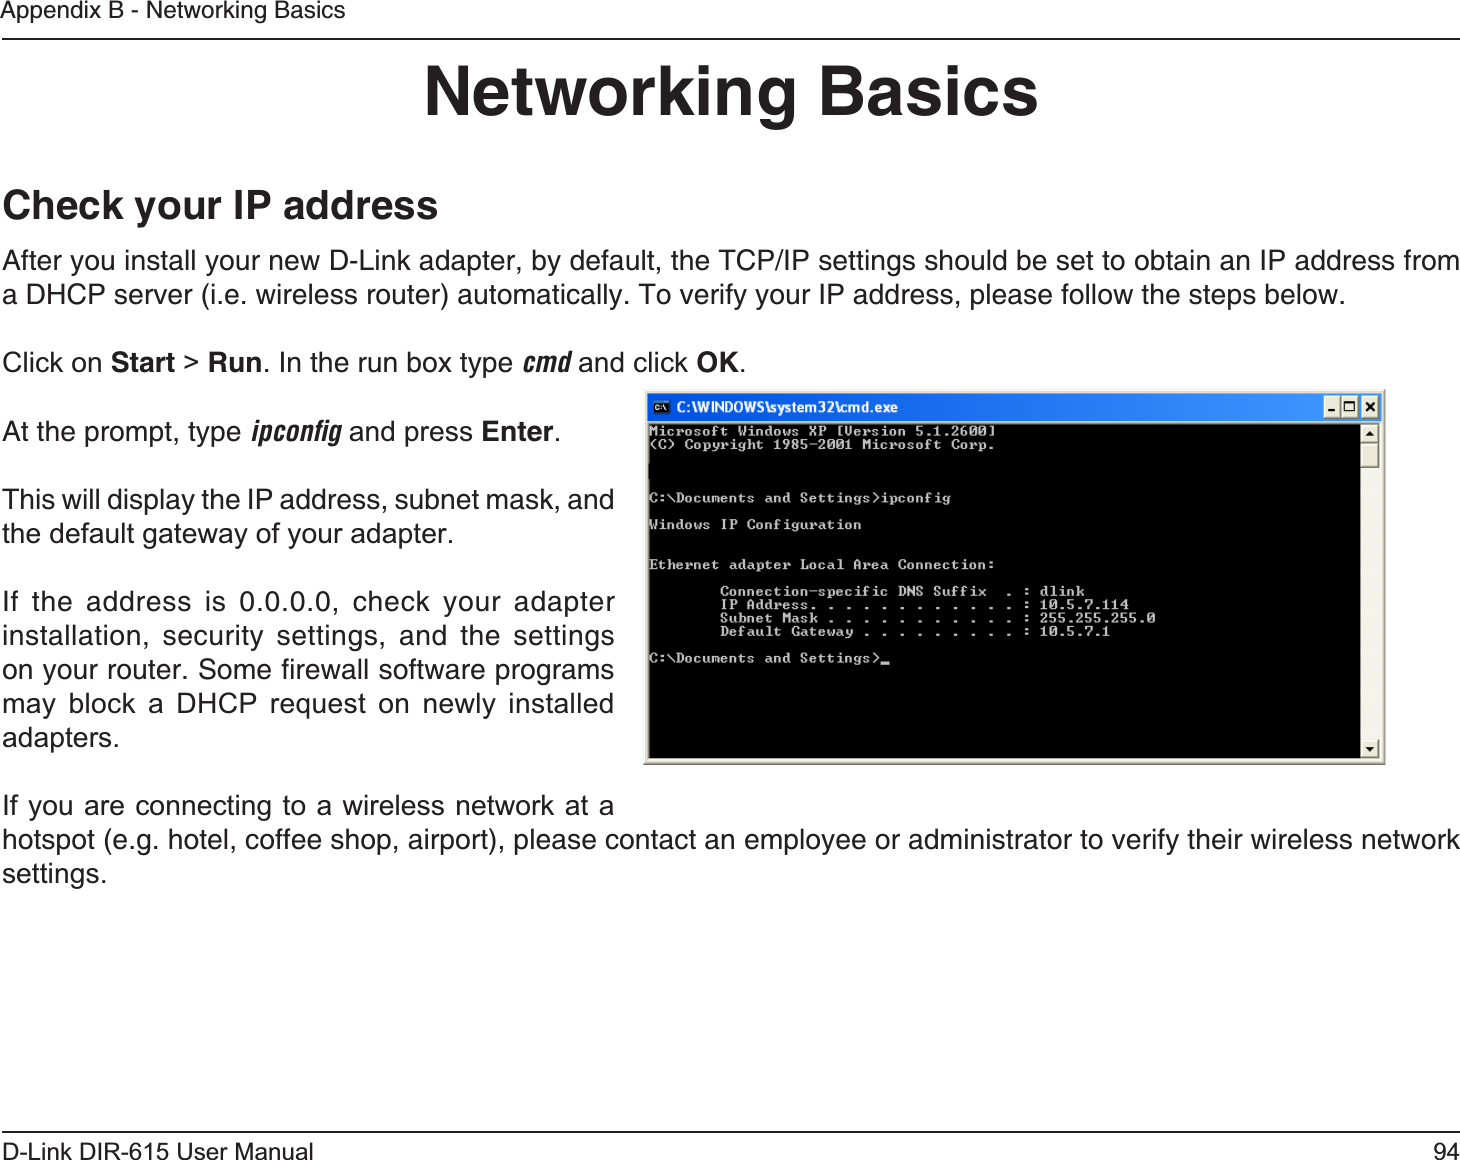 94D-Link DIR-615 User ManualAppendix B - Networking BasicsNetworking BasicsCheck your IP addressAfter you install your new D-Link adapter, by default, the TCP/IP settings should be set to obtain an IP address from a DHCP server (i.e. wireless router) automatically. To verify your IP address, please follow the steps below.Click on Start &gt; Run. In the run box type cmd and click OK.At the prompt, type ipconﬁg and press Enter.This will display the IP address, subnet mask, and the default gateway of your adapter.If the address is 0.0.0.0, check your adapter installation, security settings, and the settings on your router. Some ﬁrewall software programs may block a DHCP request on newly installed adapters.If you are connecting to a wireless network at a hotspot (e.g. hotel, coffee shop, airport), please contact an employee or administrator to verify their wireless network settings.